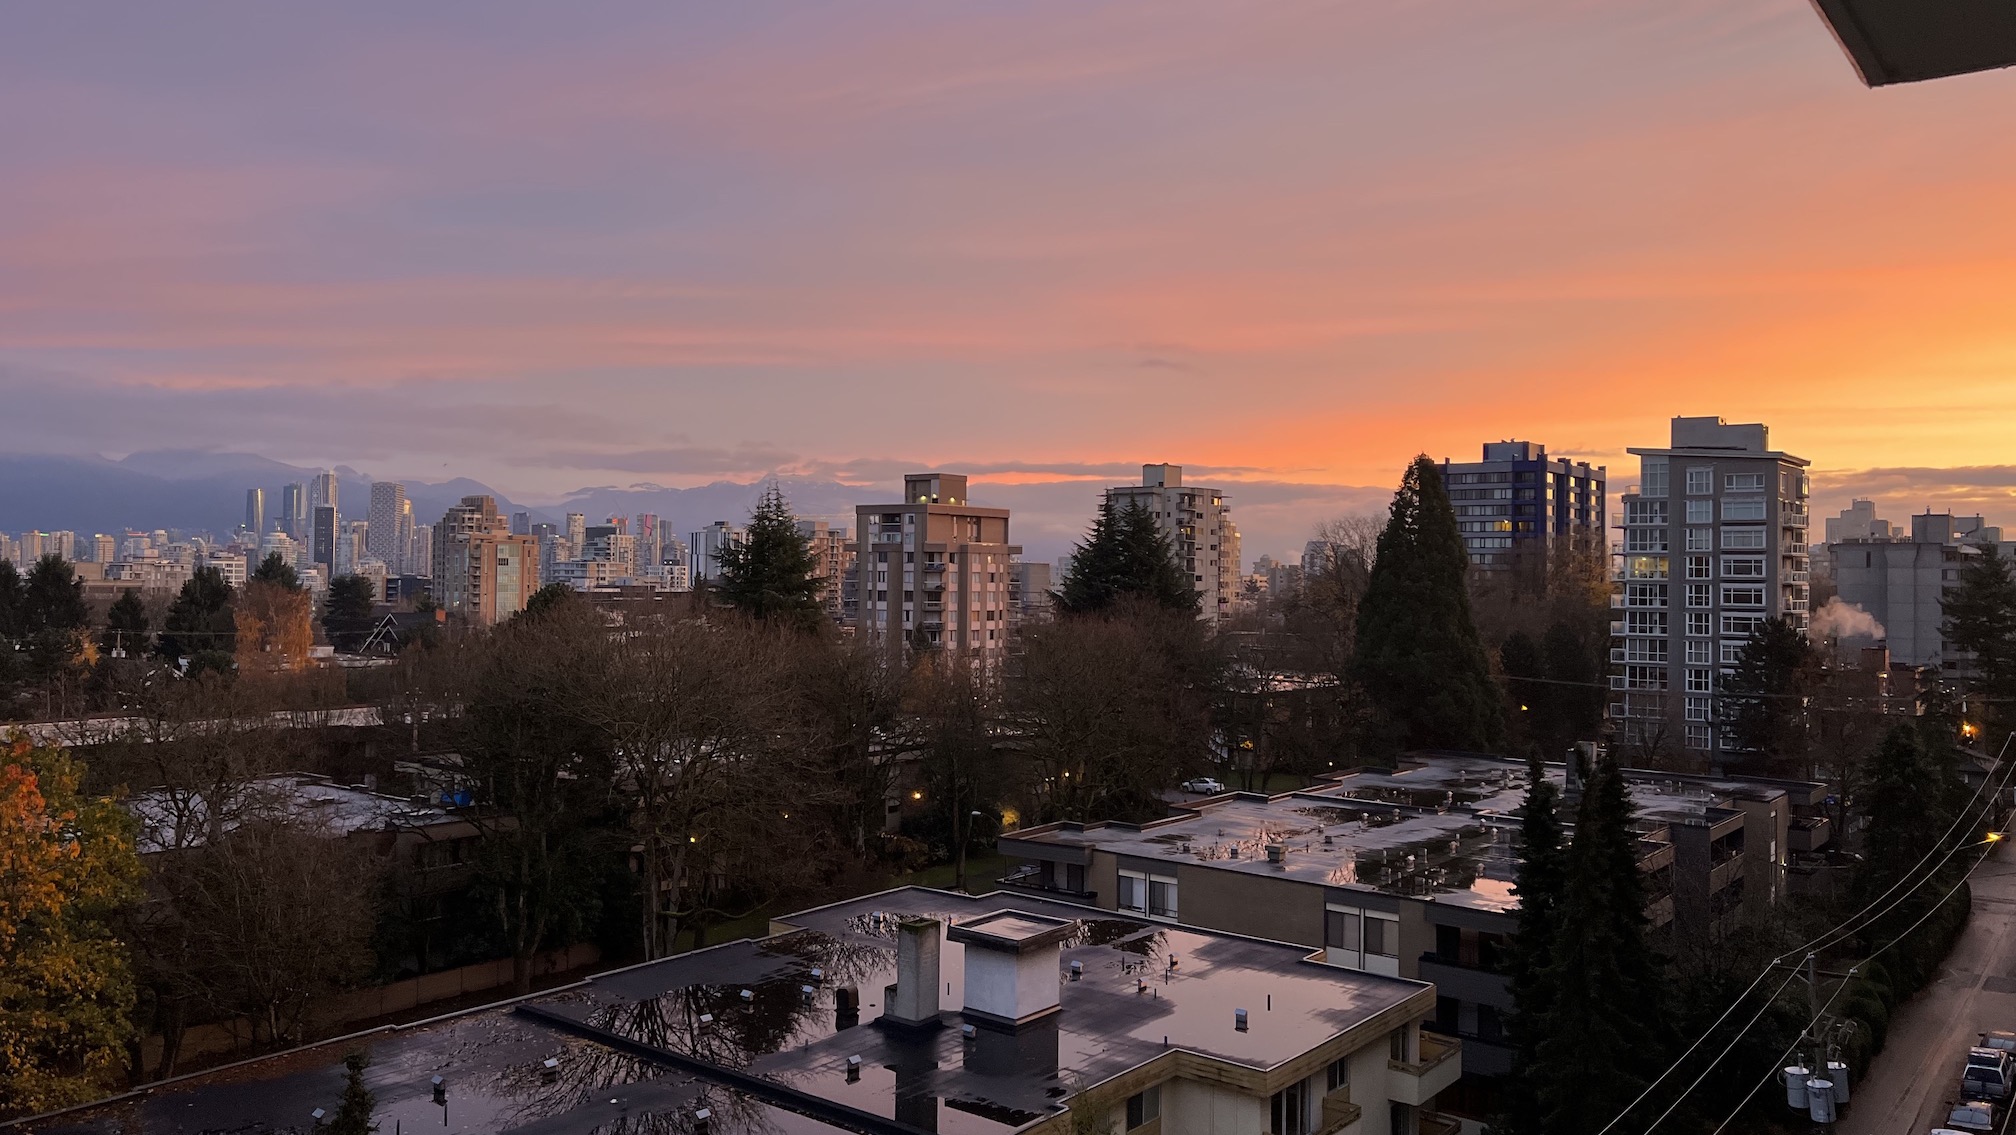 The Vancouver skyline, during a sunrise, with the mountains faintly visible in the background